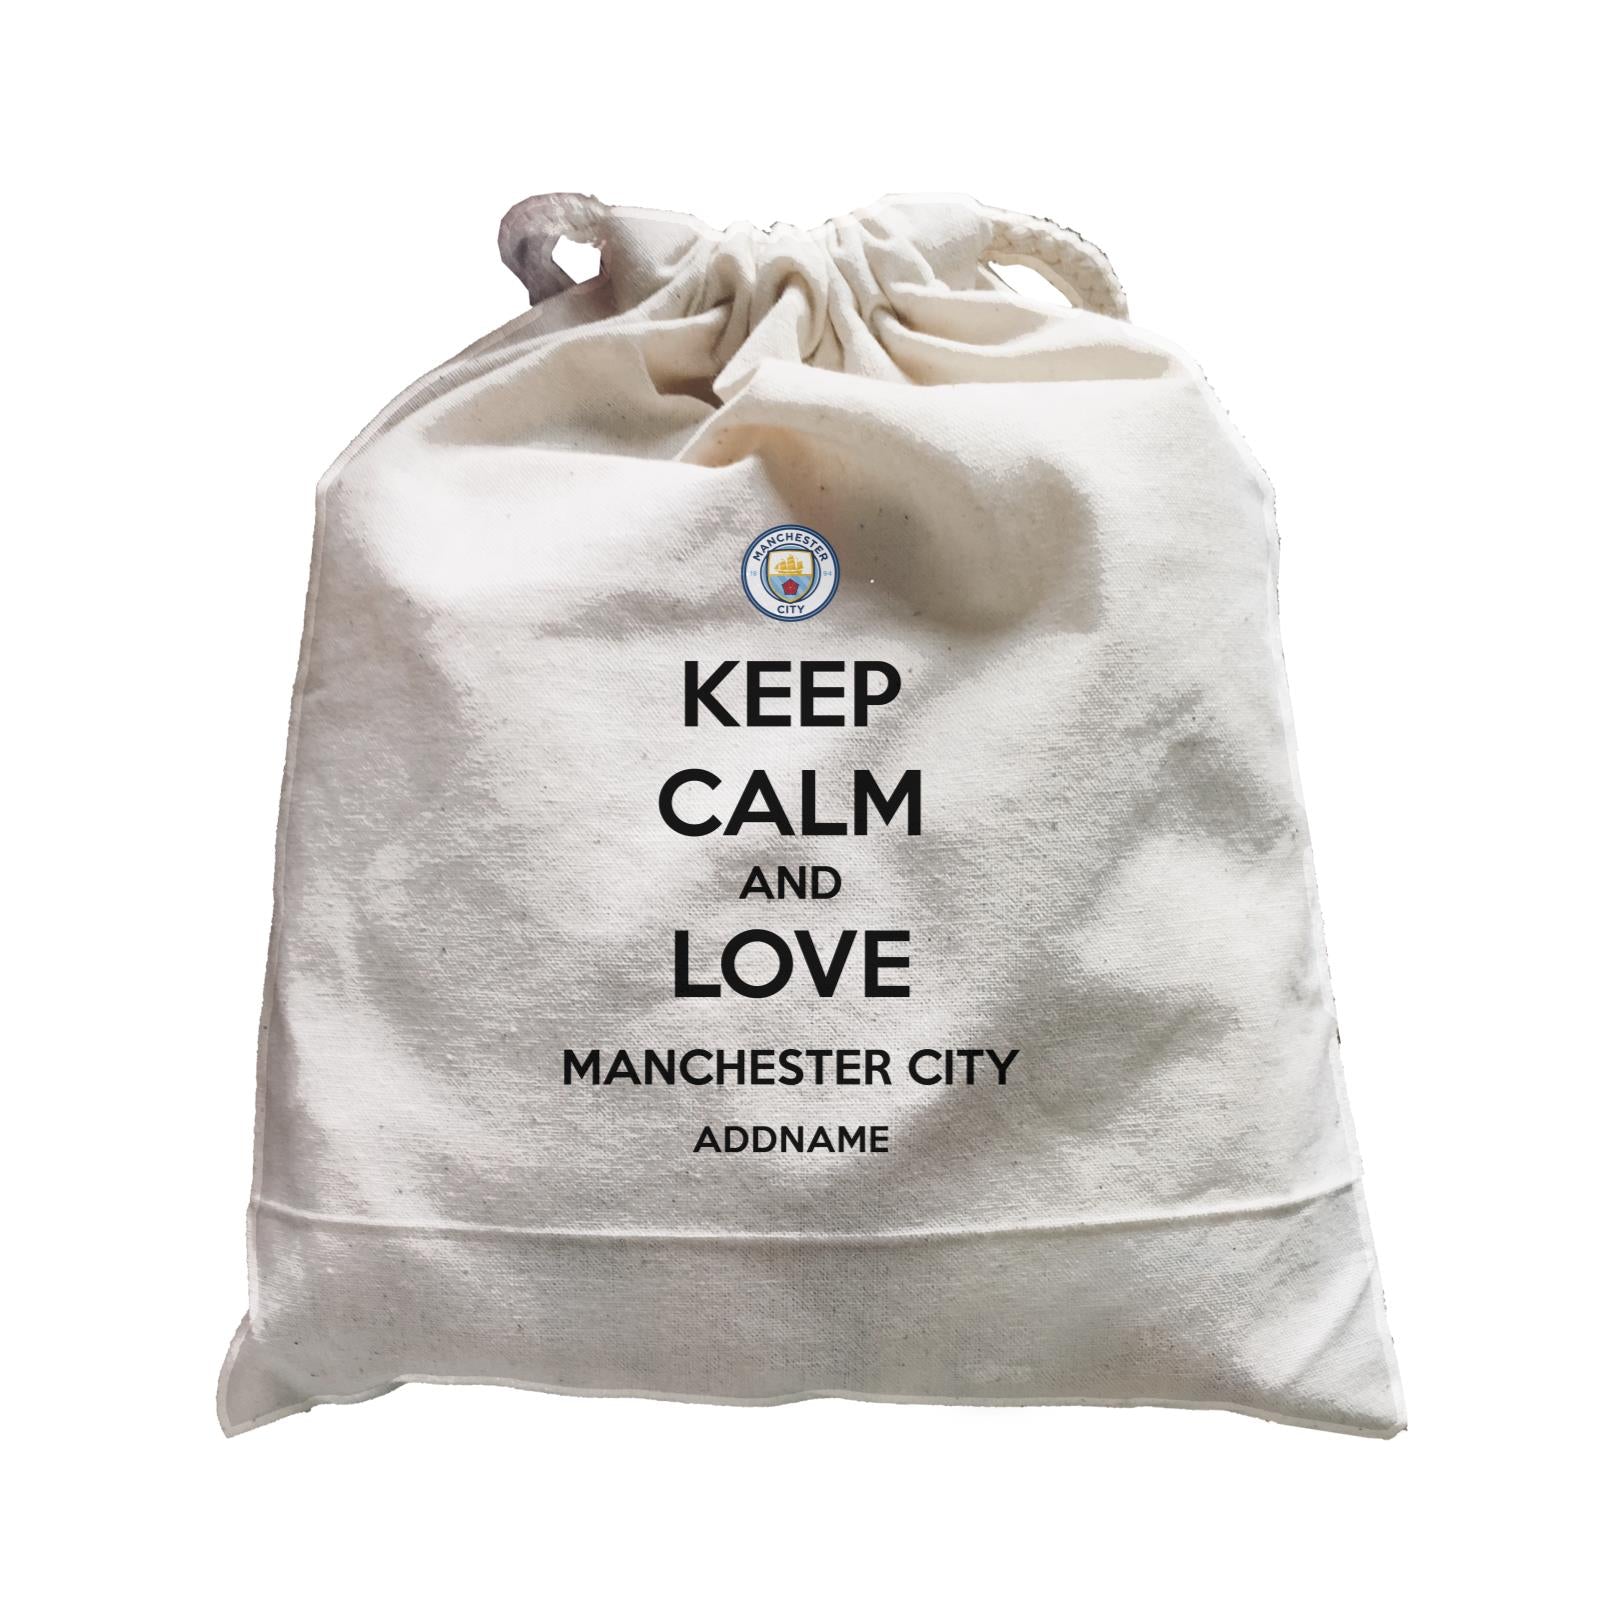 Manchester City Football Keep Calm And Love Series Addname Satchel